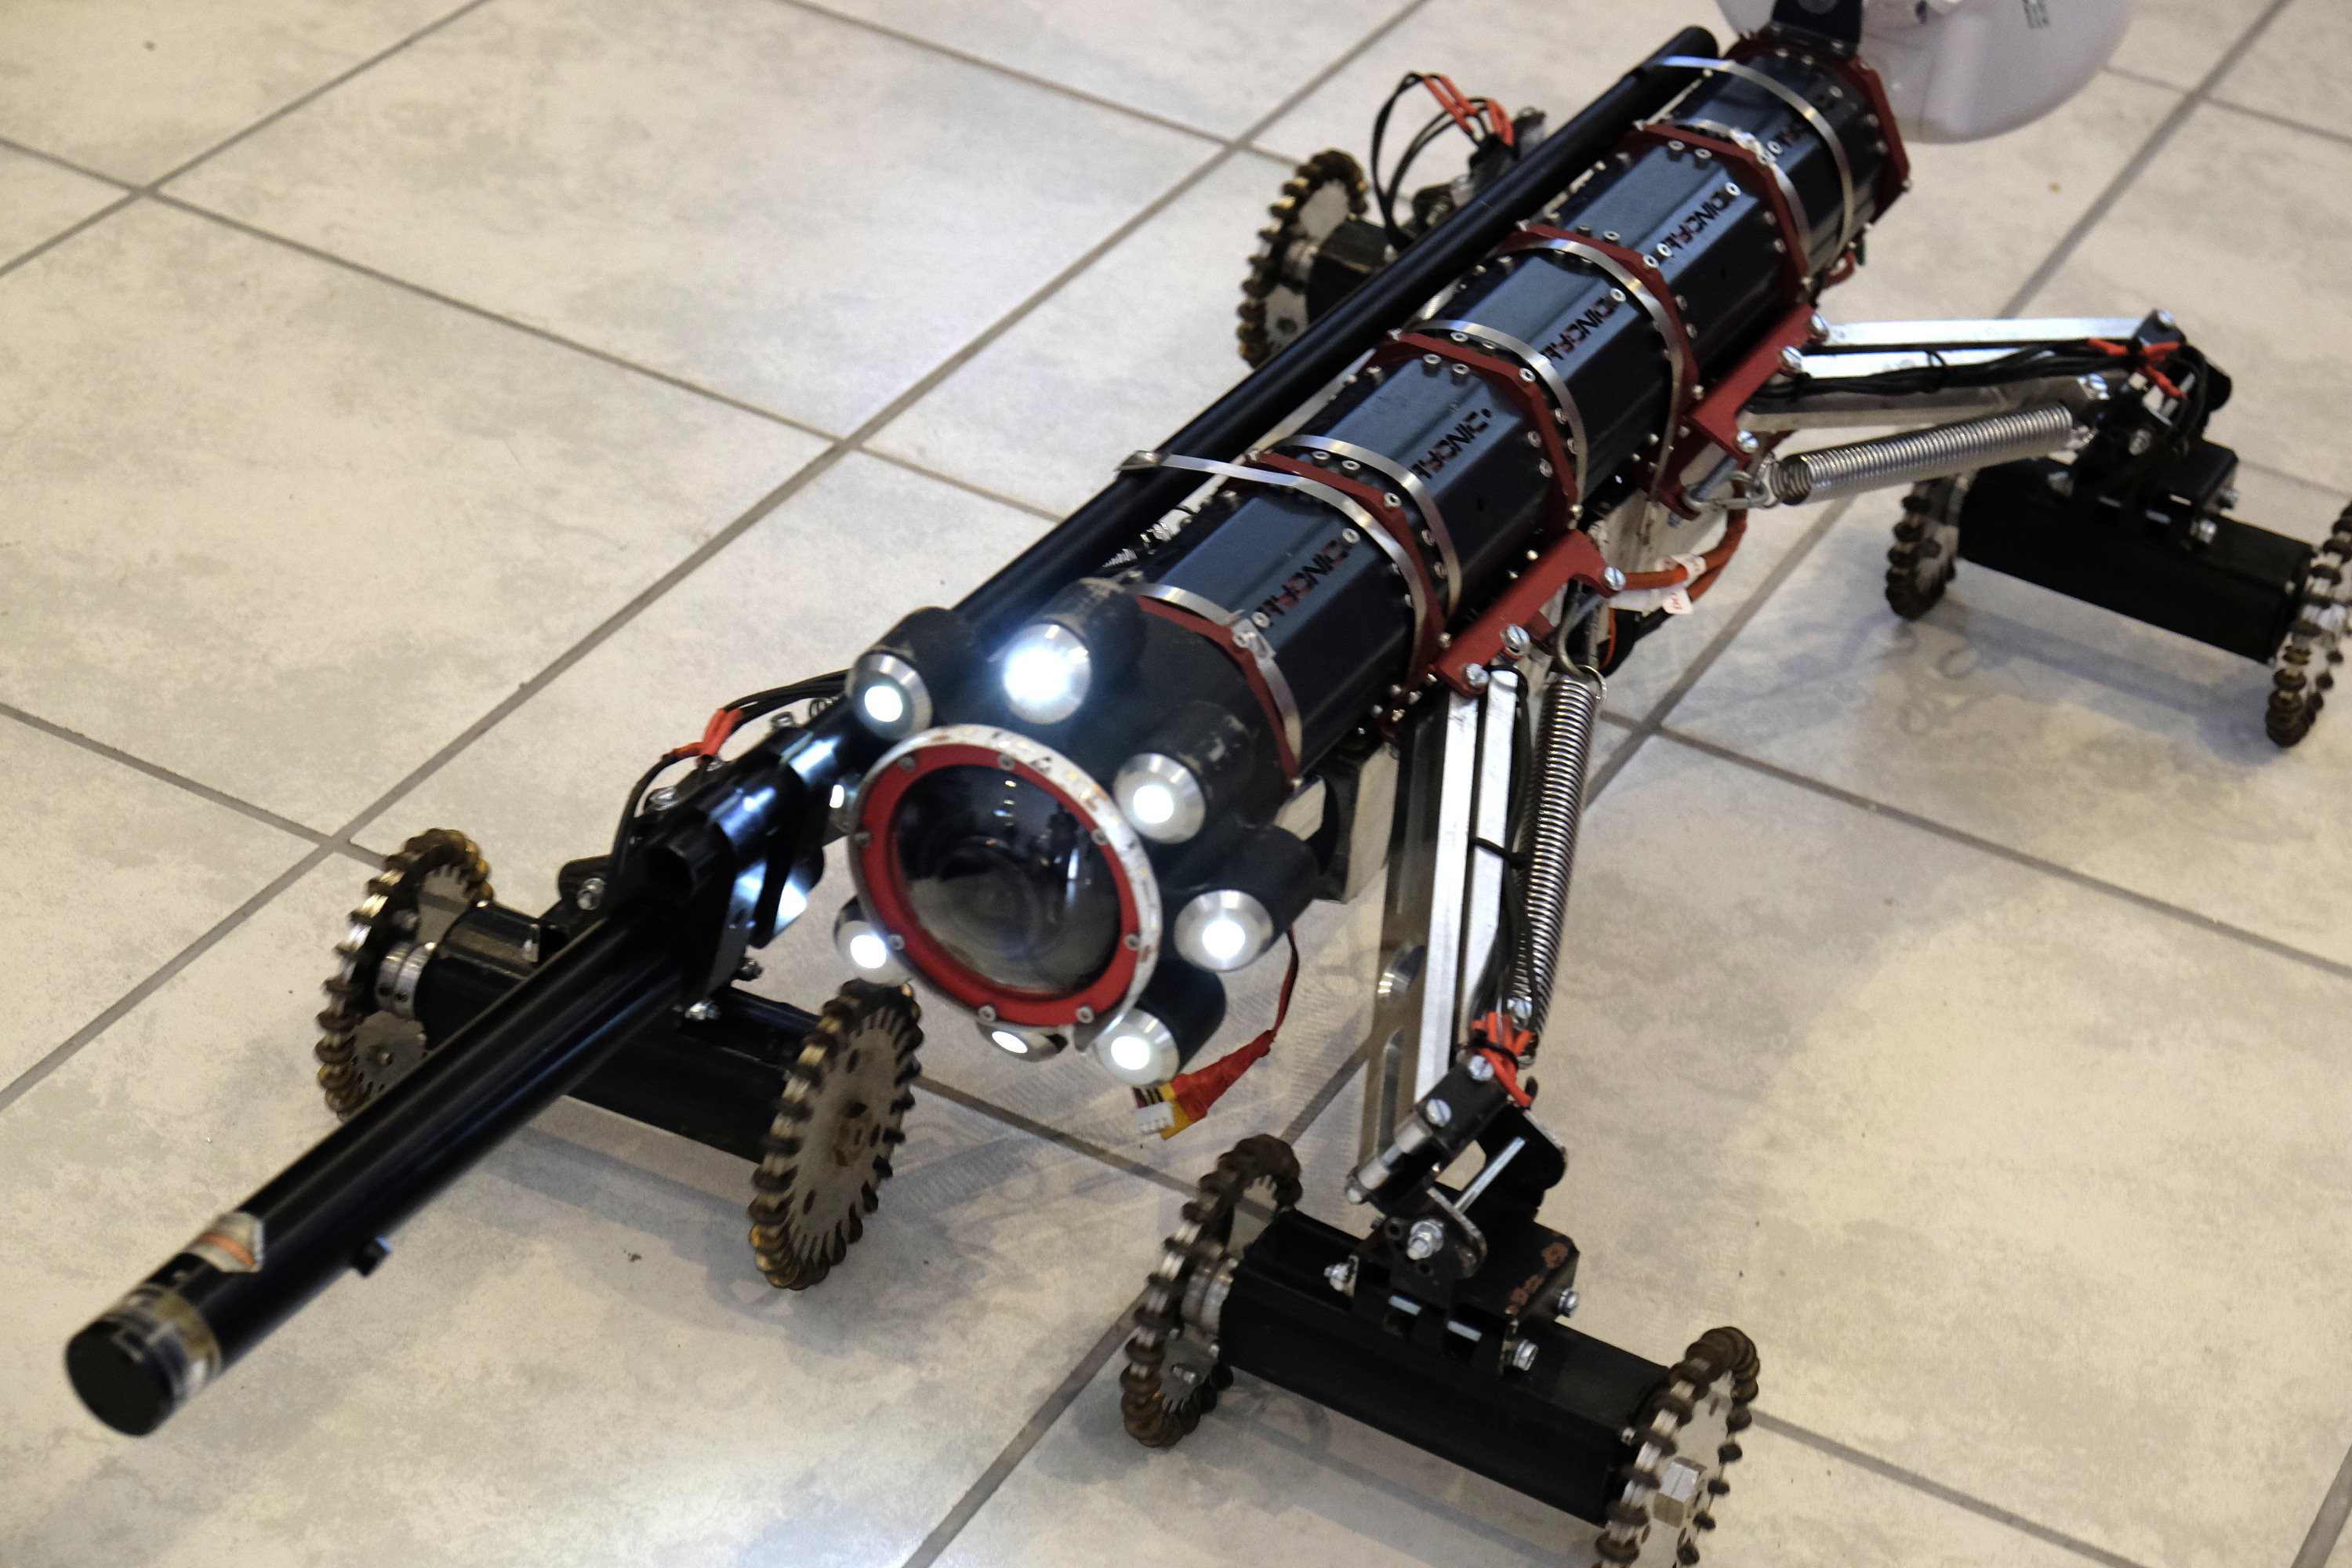 The current prototype of the Maxi Crawler. 